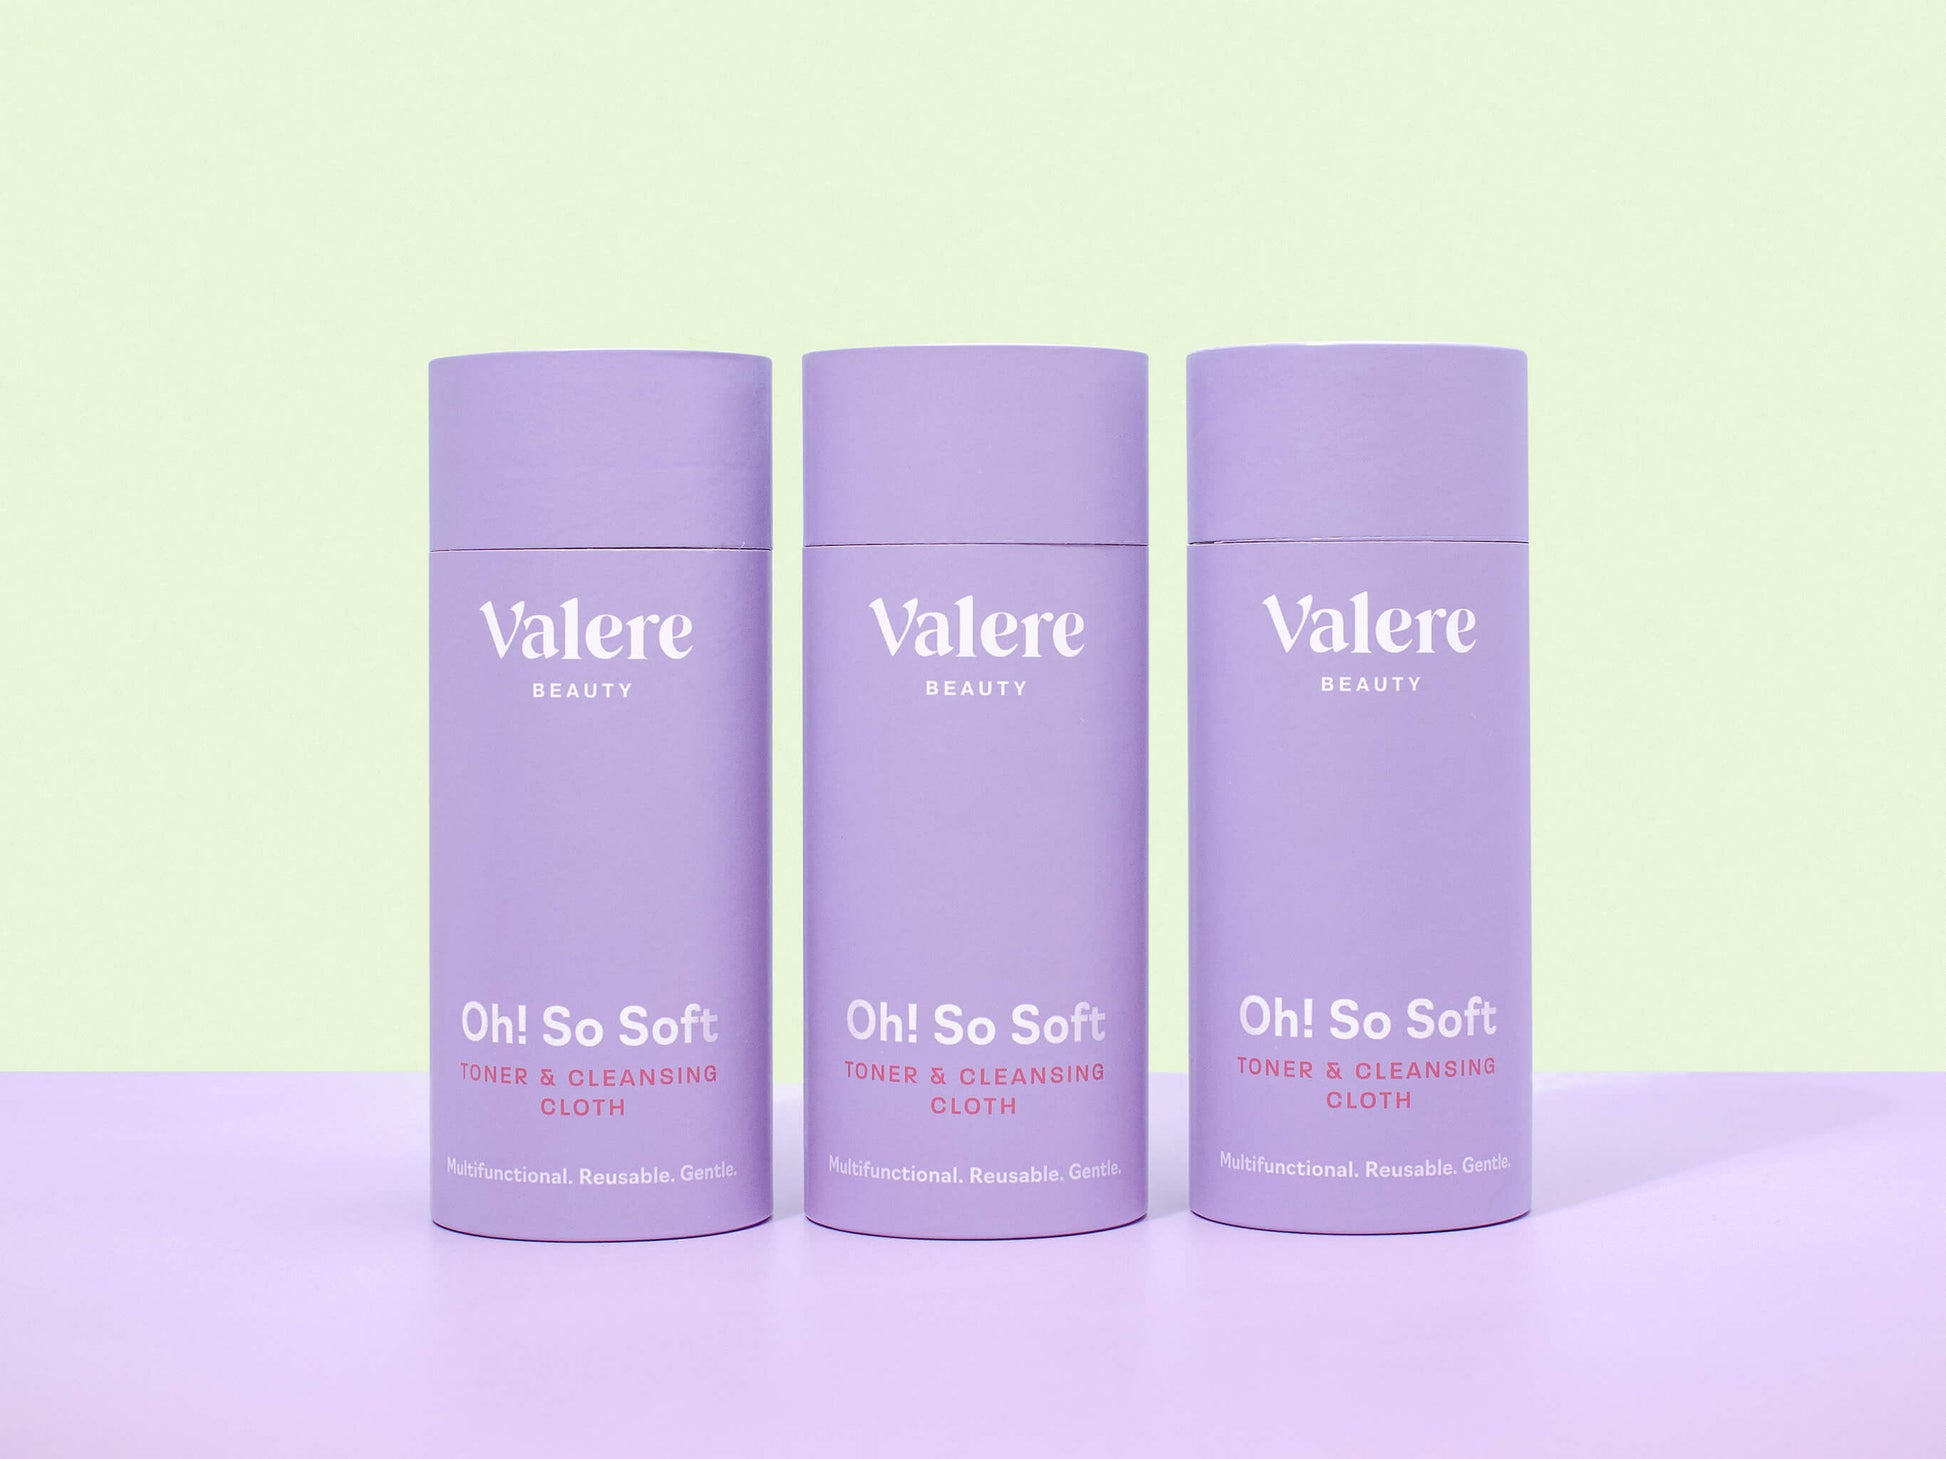 Valere Beauty Oh! So Soft Toner & Cleansing Cloth Microfiber Makeup Remover Cloth and Bamboo Cotton Toner Cloth Double Bundle cylinder packaging that says 'multifunctional, reusable, gentle'